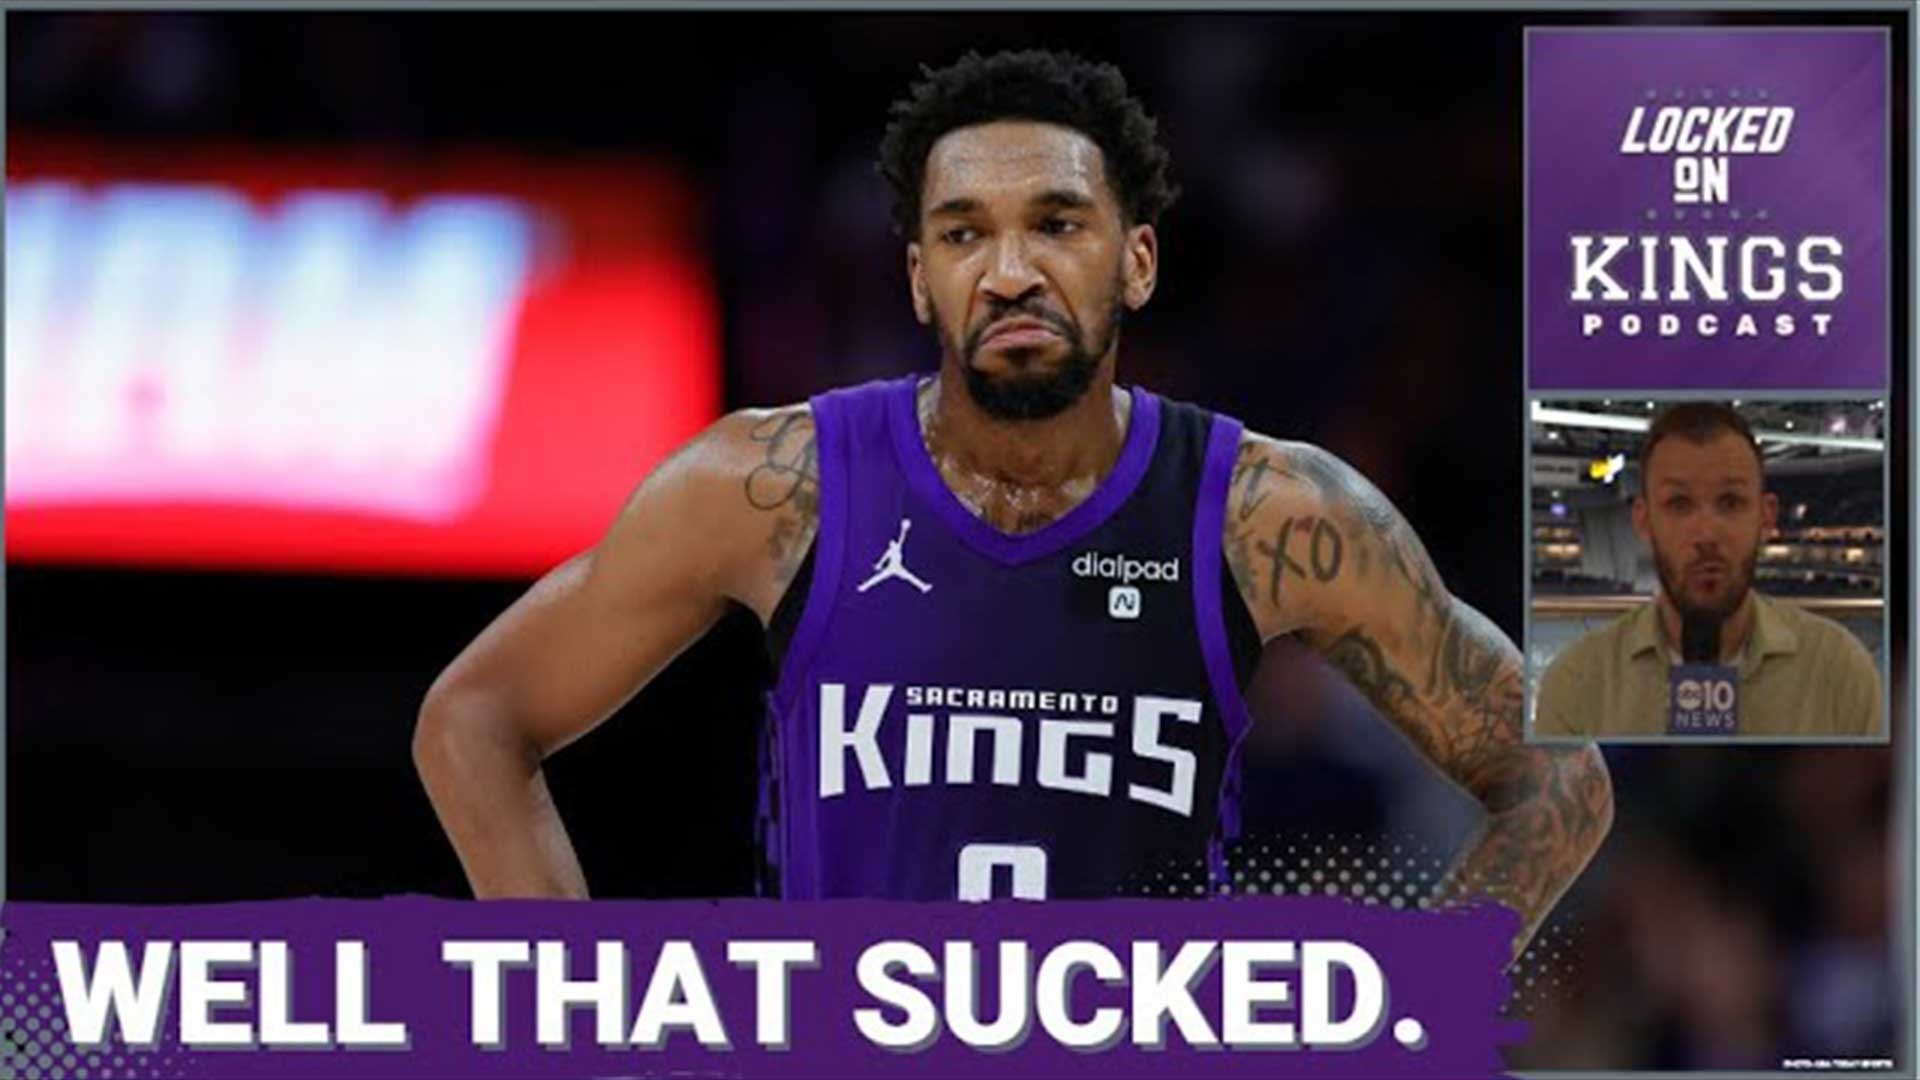 Matt George reacts to the Sacramento Kings getting completely dominated by the Dallas Mavericks in the biggest game of this season with massive playoff implications.